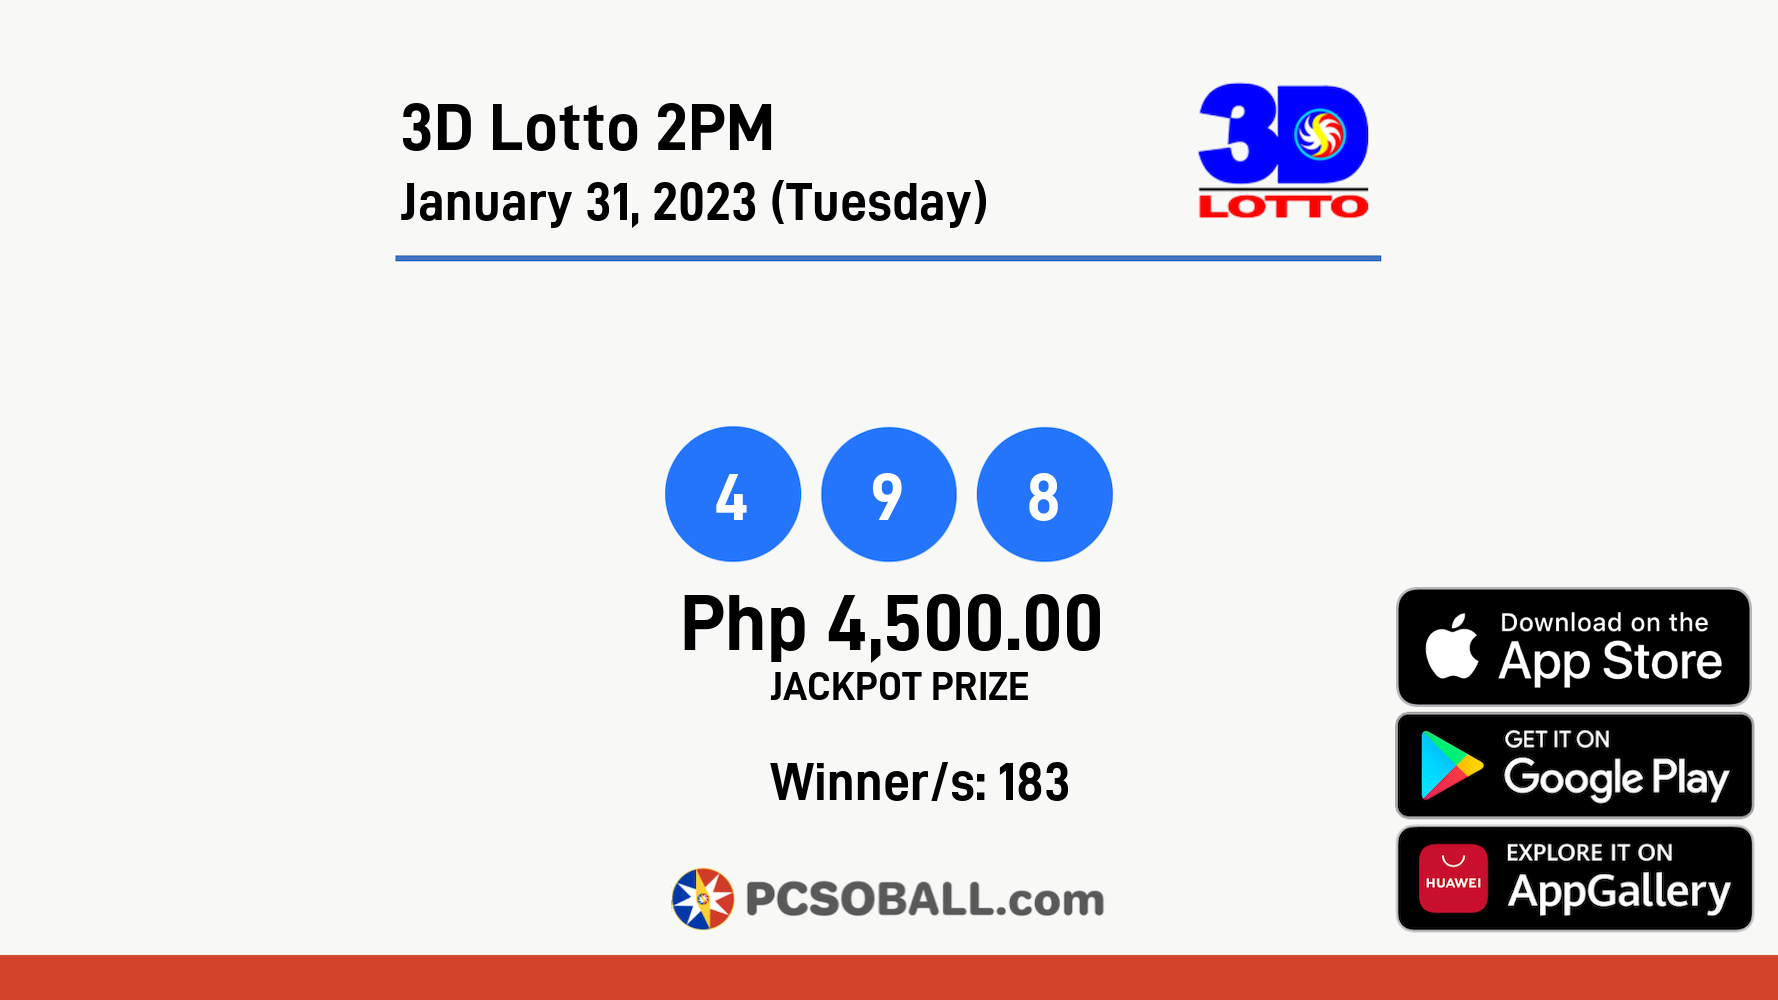 3D Lotto 2PM January 31, 2023 (Tuesday) Result